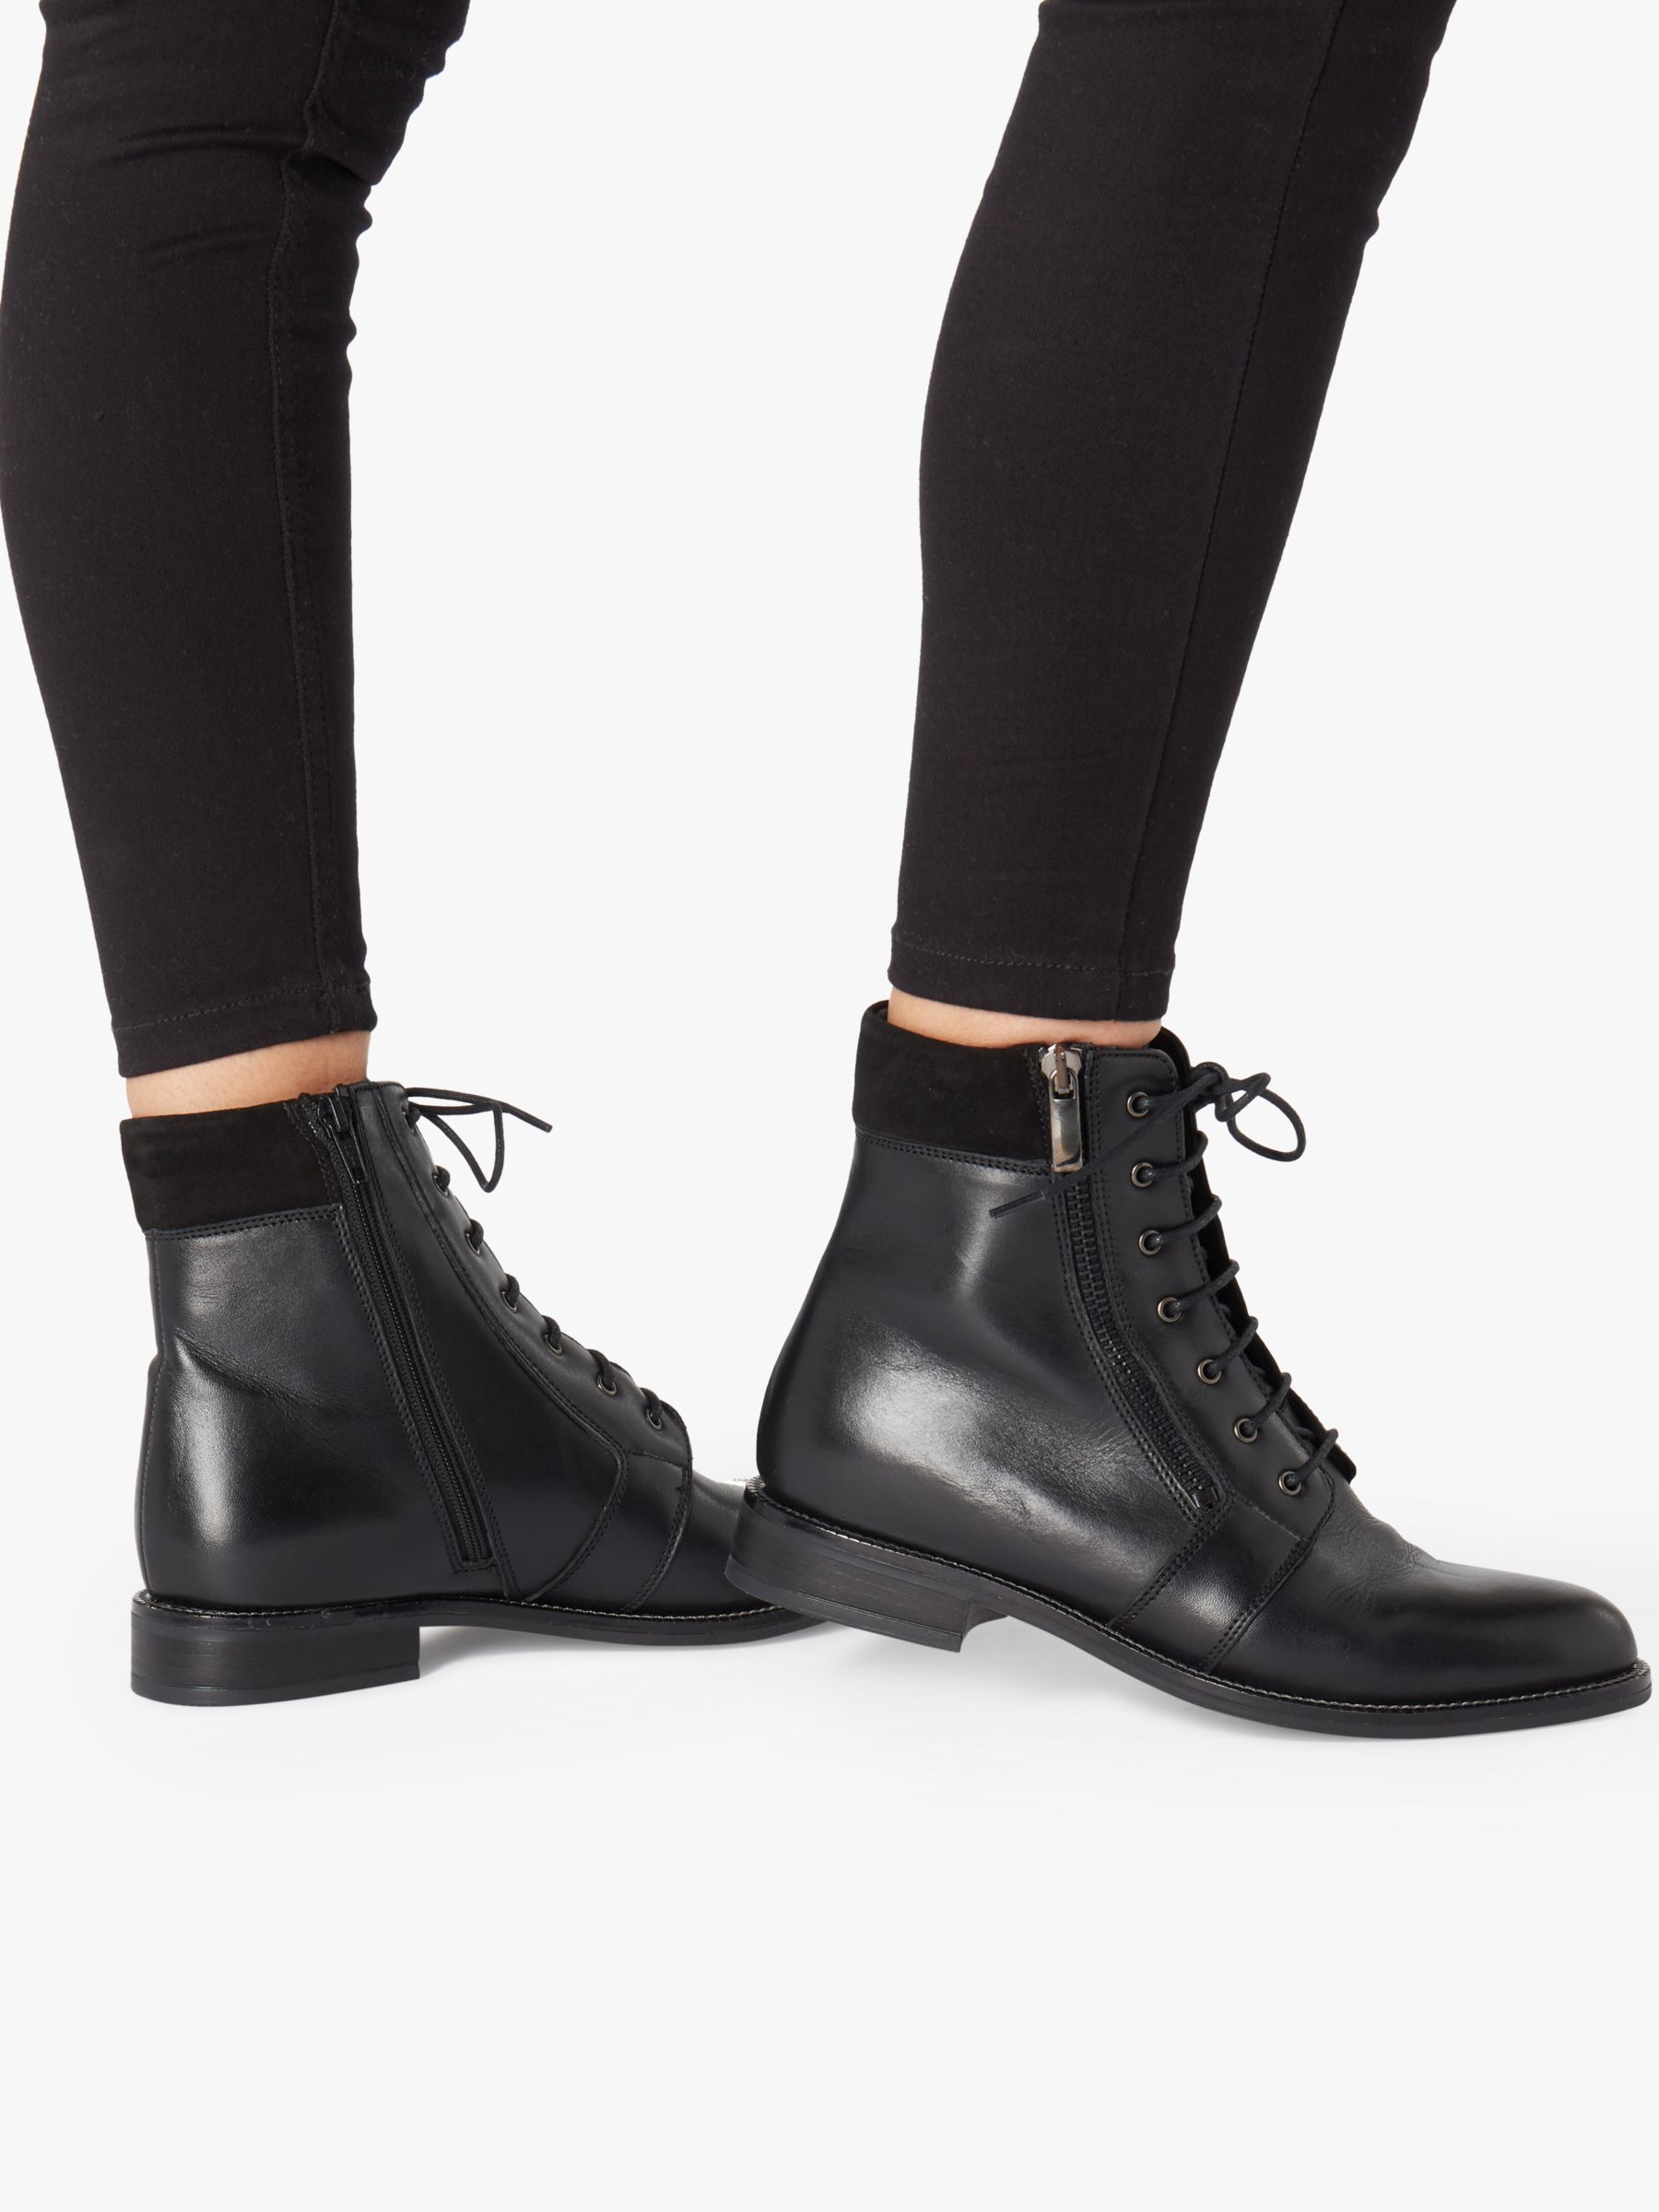 Dune Quad Side Zip Ankle Boots at John 